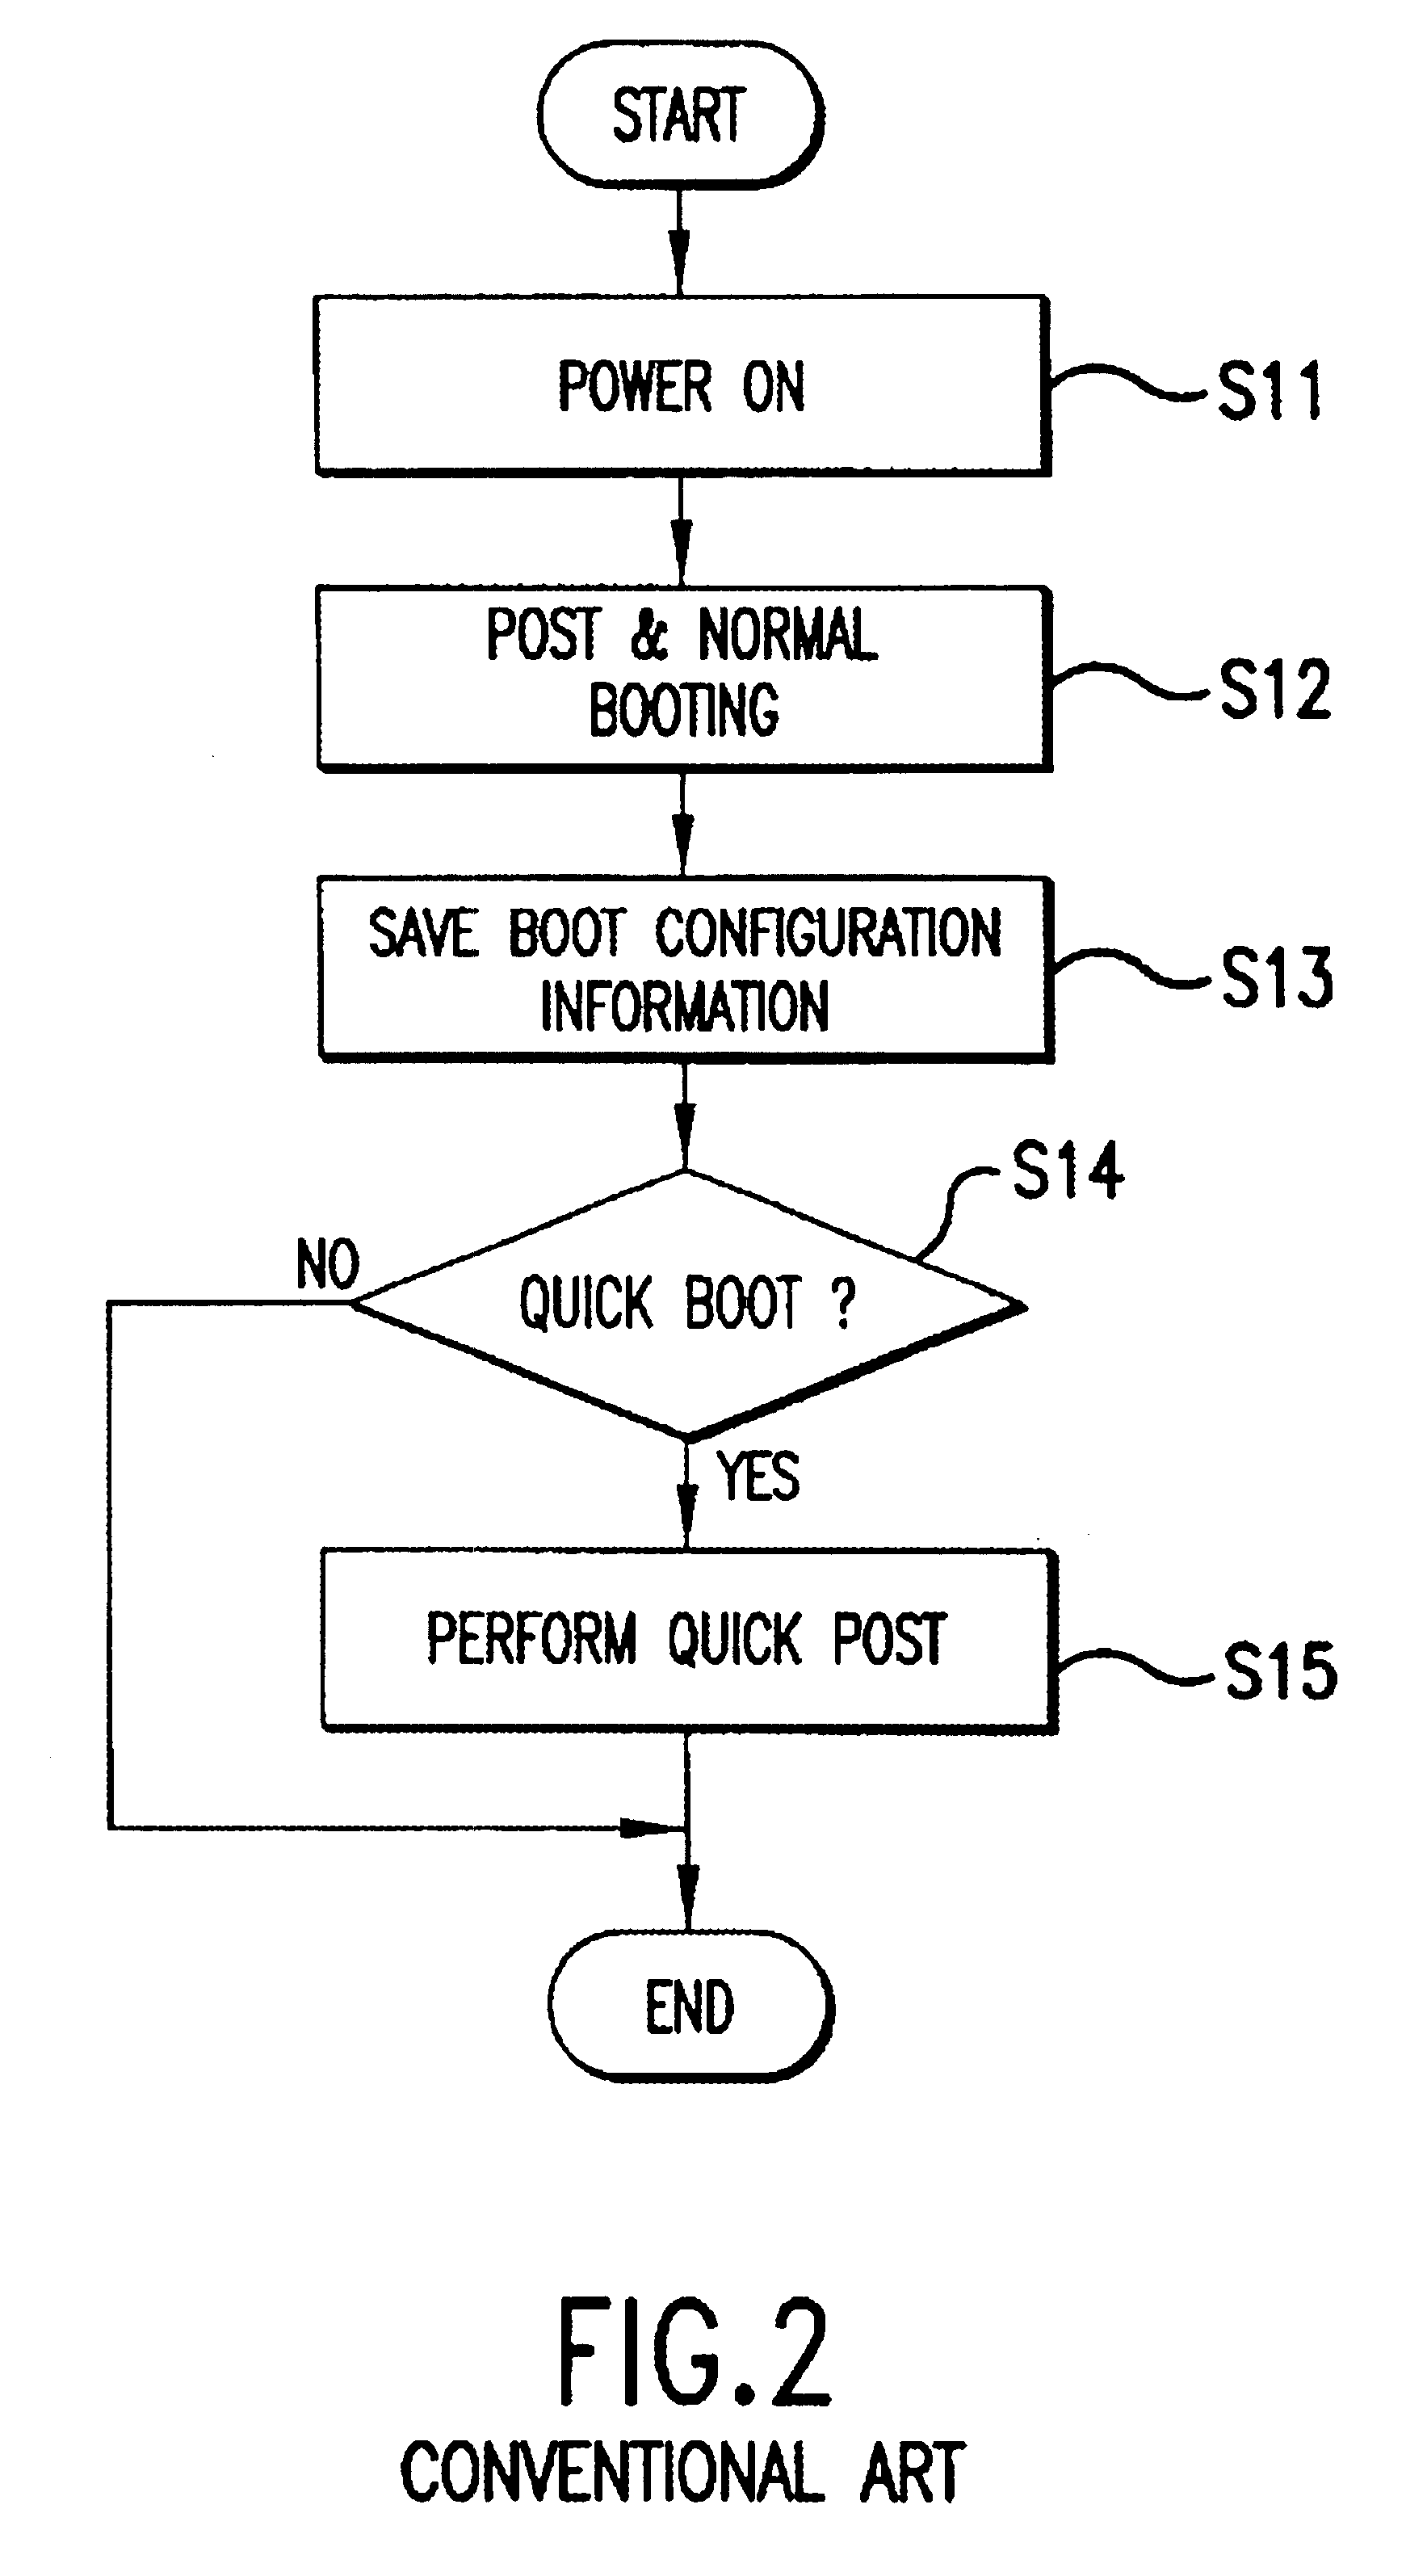 Method for quickly booting a computer system